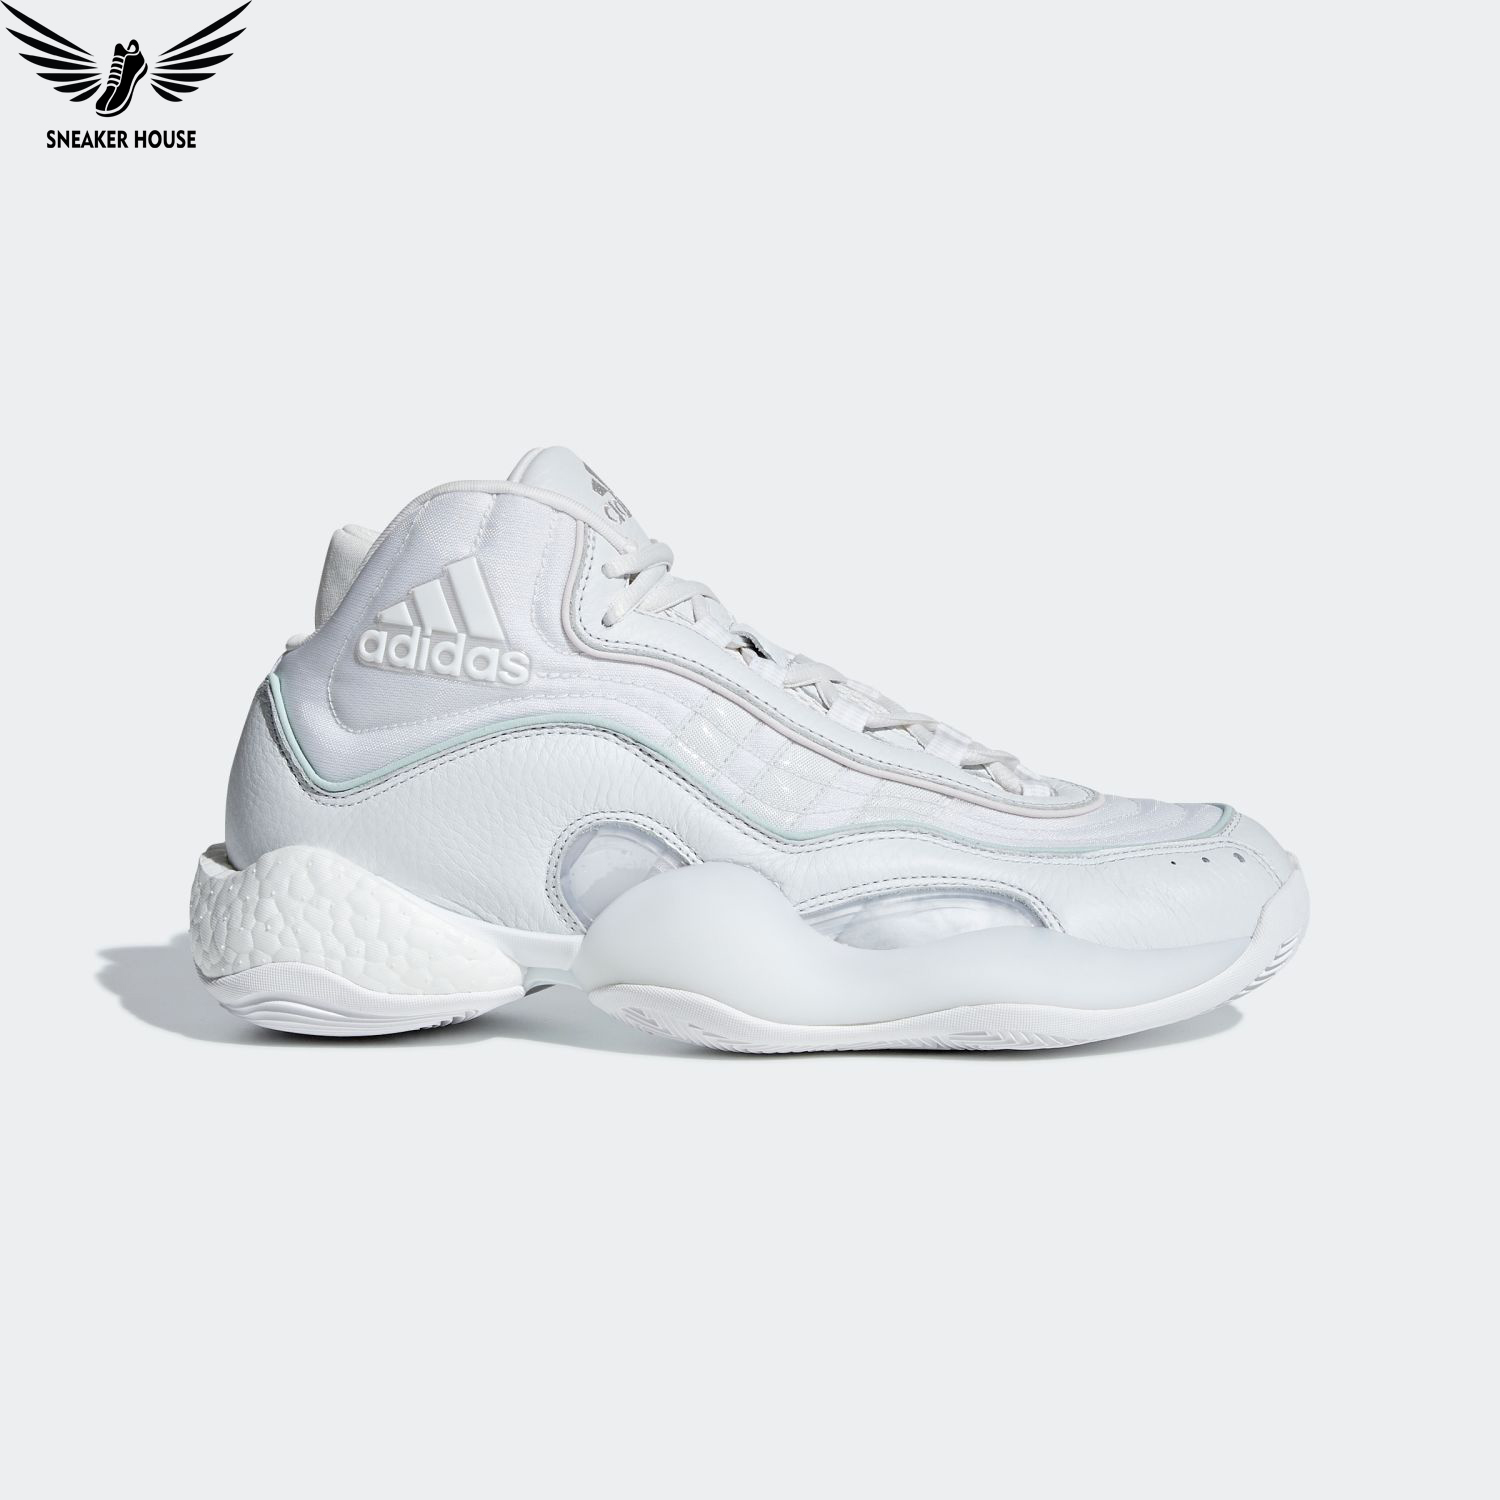 Adidas 98 X Crazy BYW Never Made Pack G28390